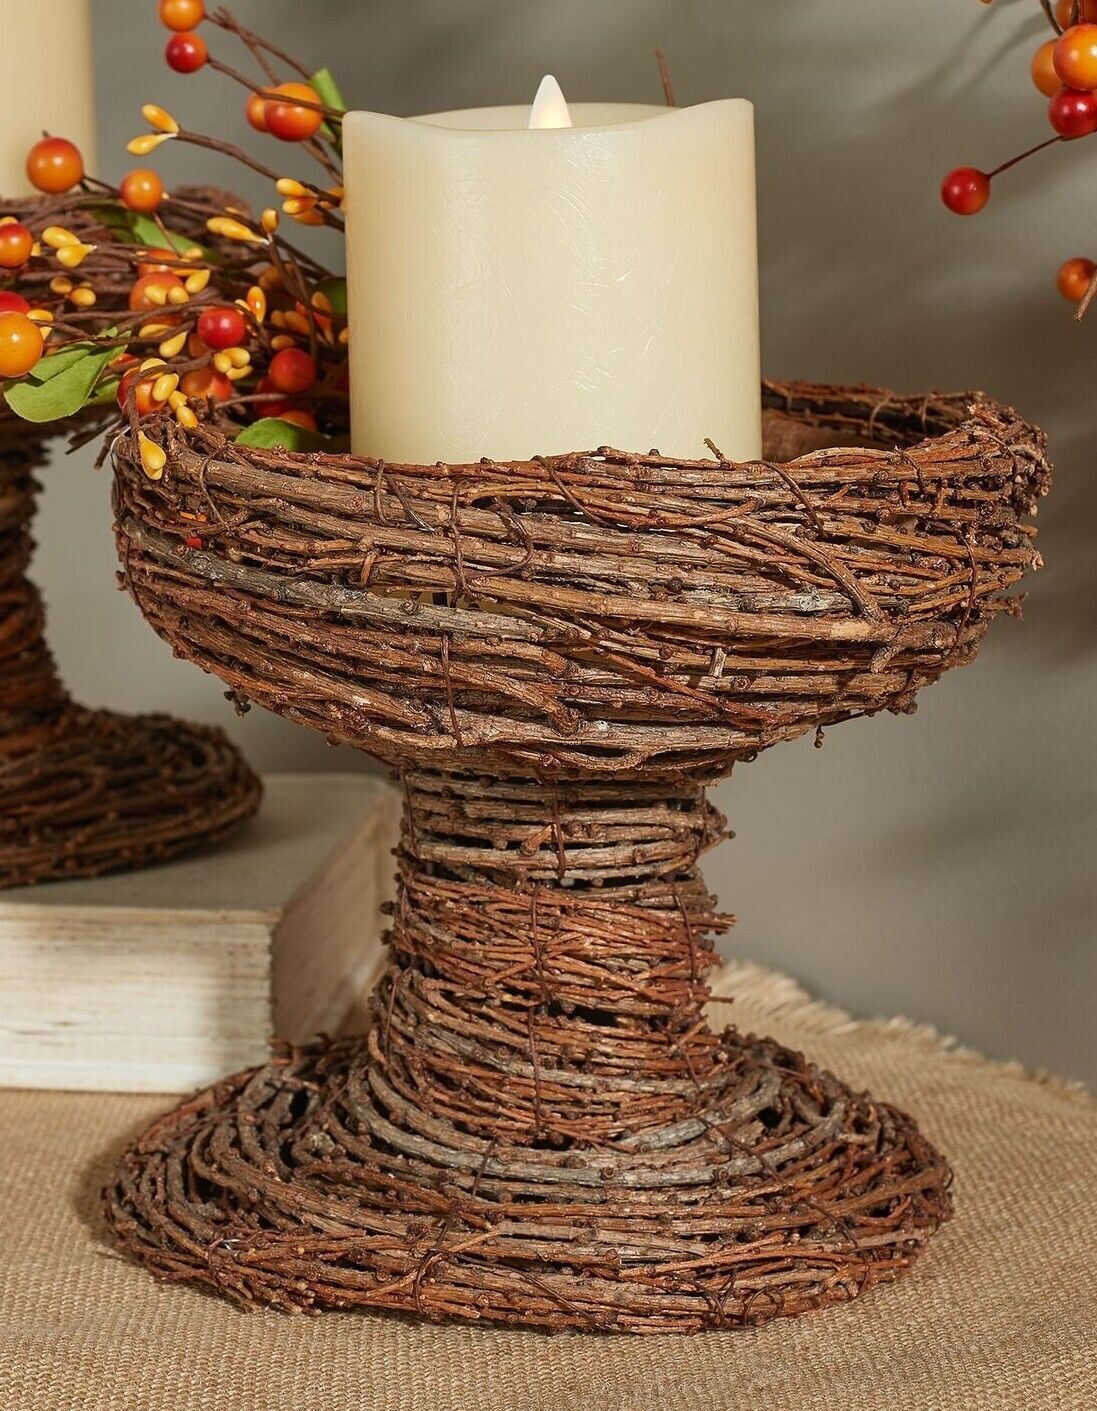 Natural Grapevine Pedestal by Valerie ONE in Natural - $22.30